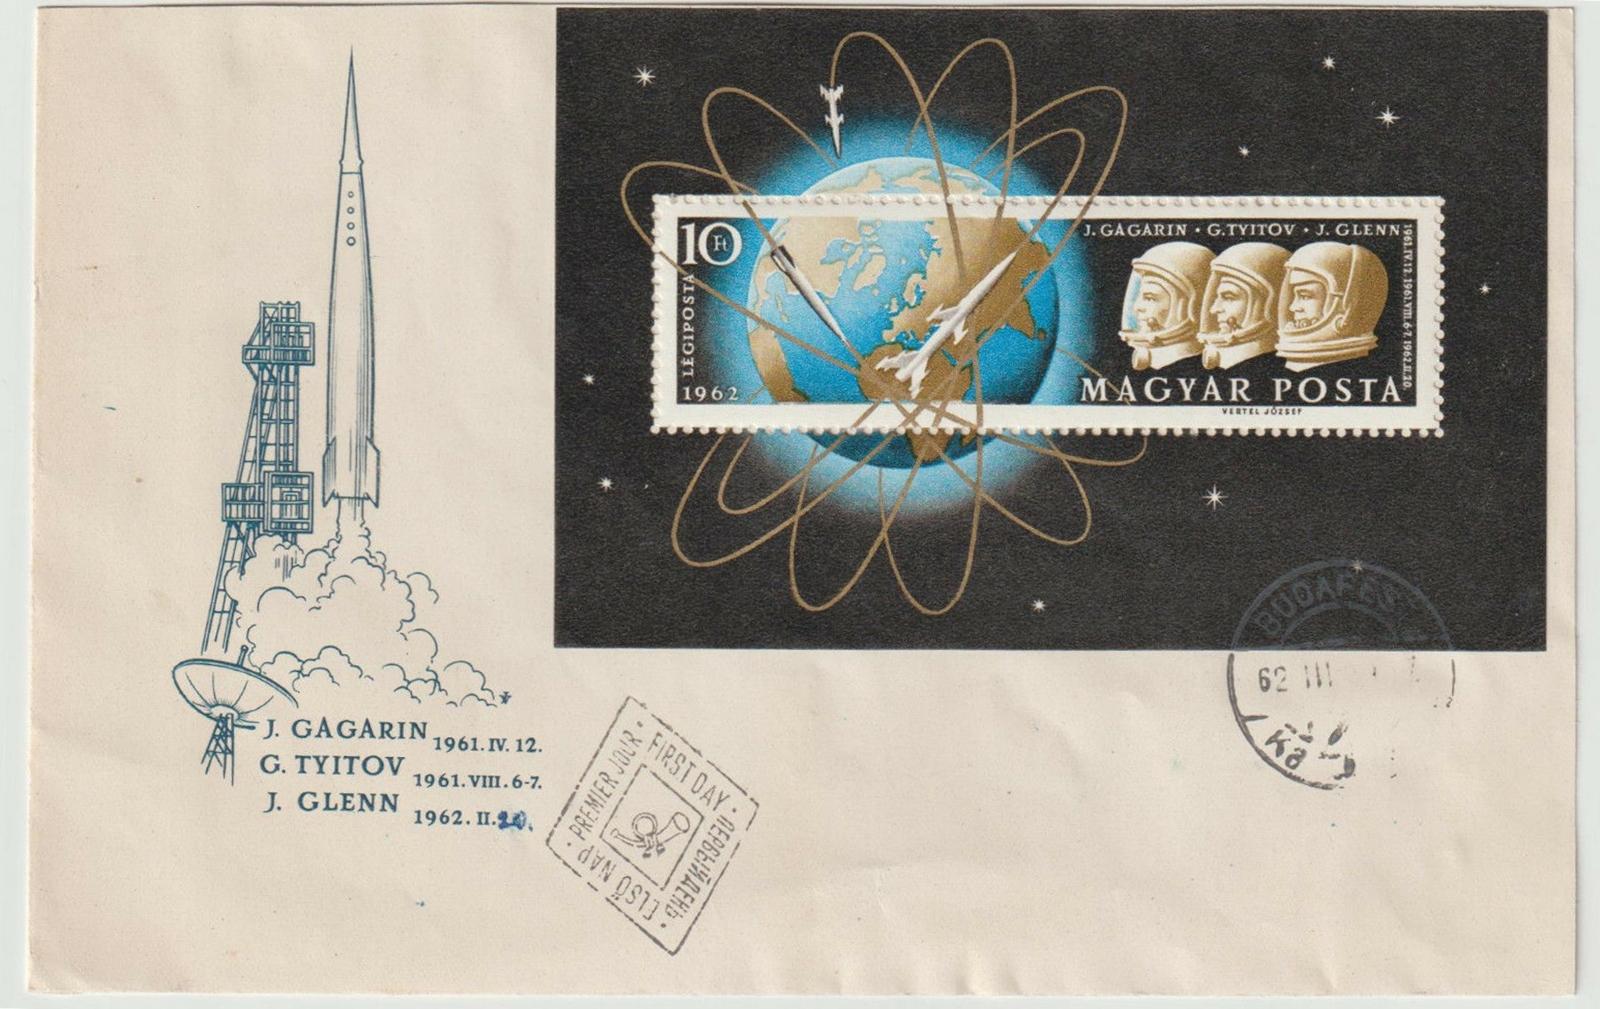 Hungary - Scott #C209 (1962) first day cover